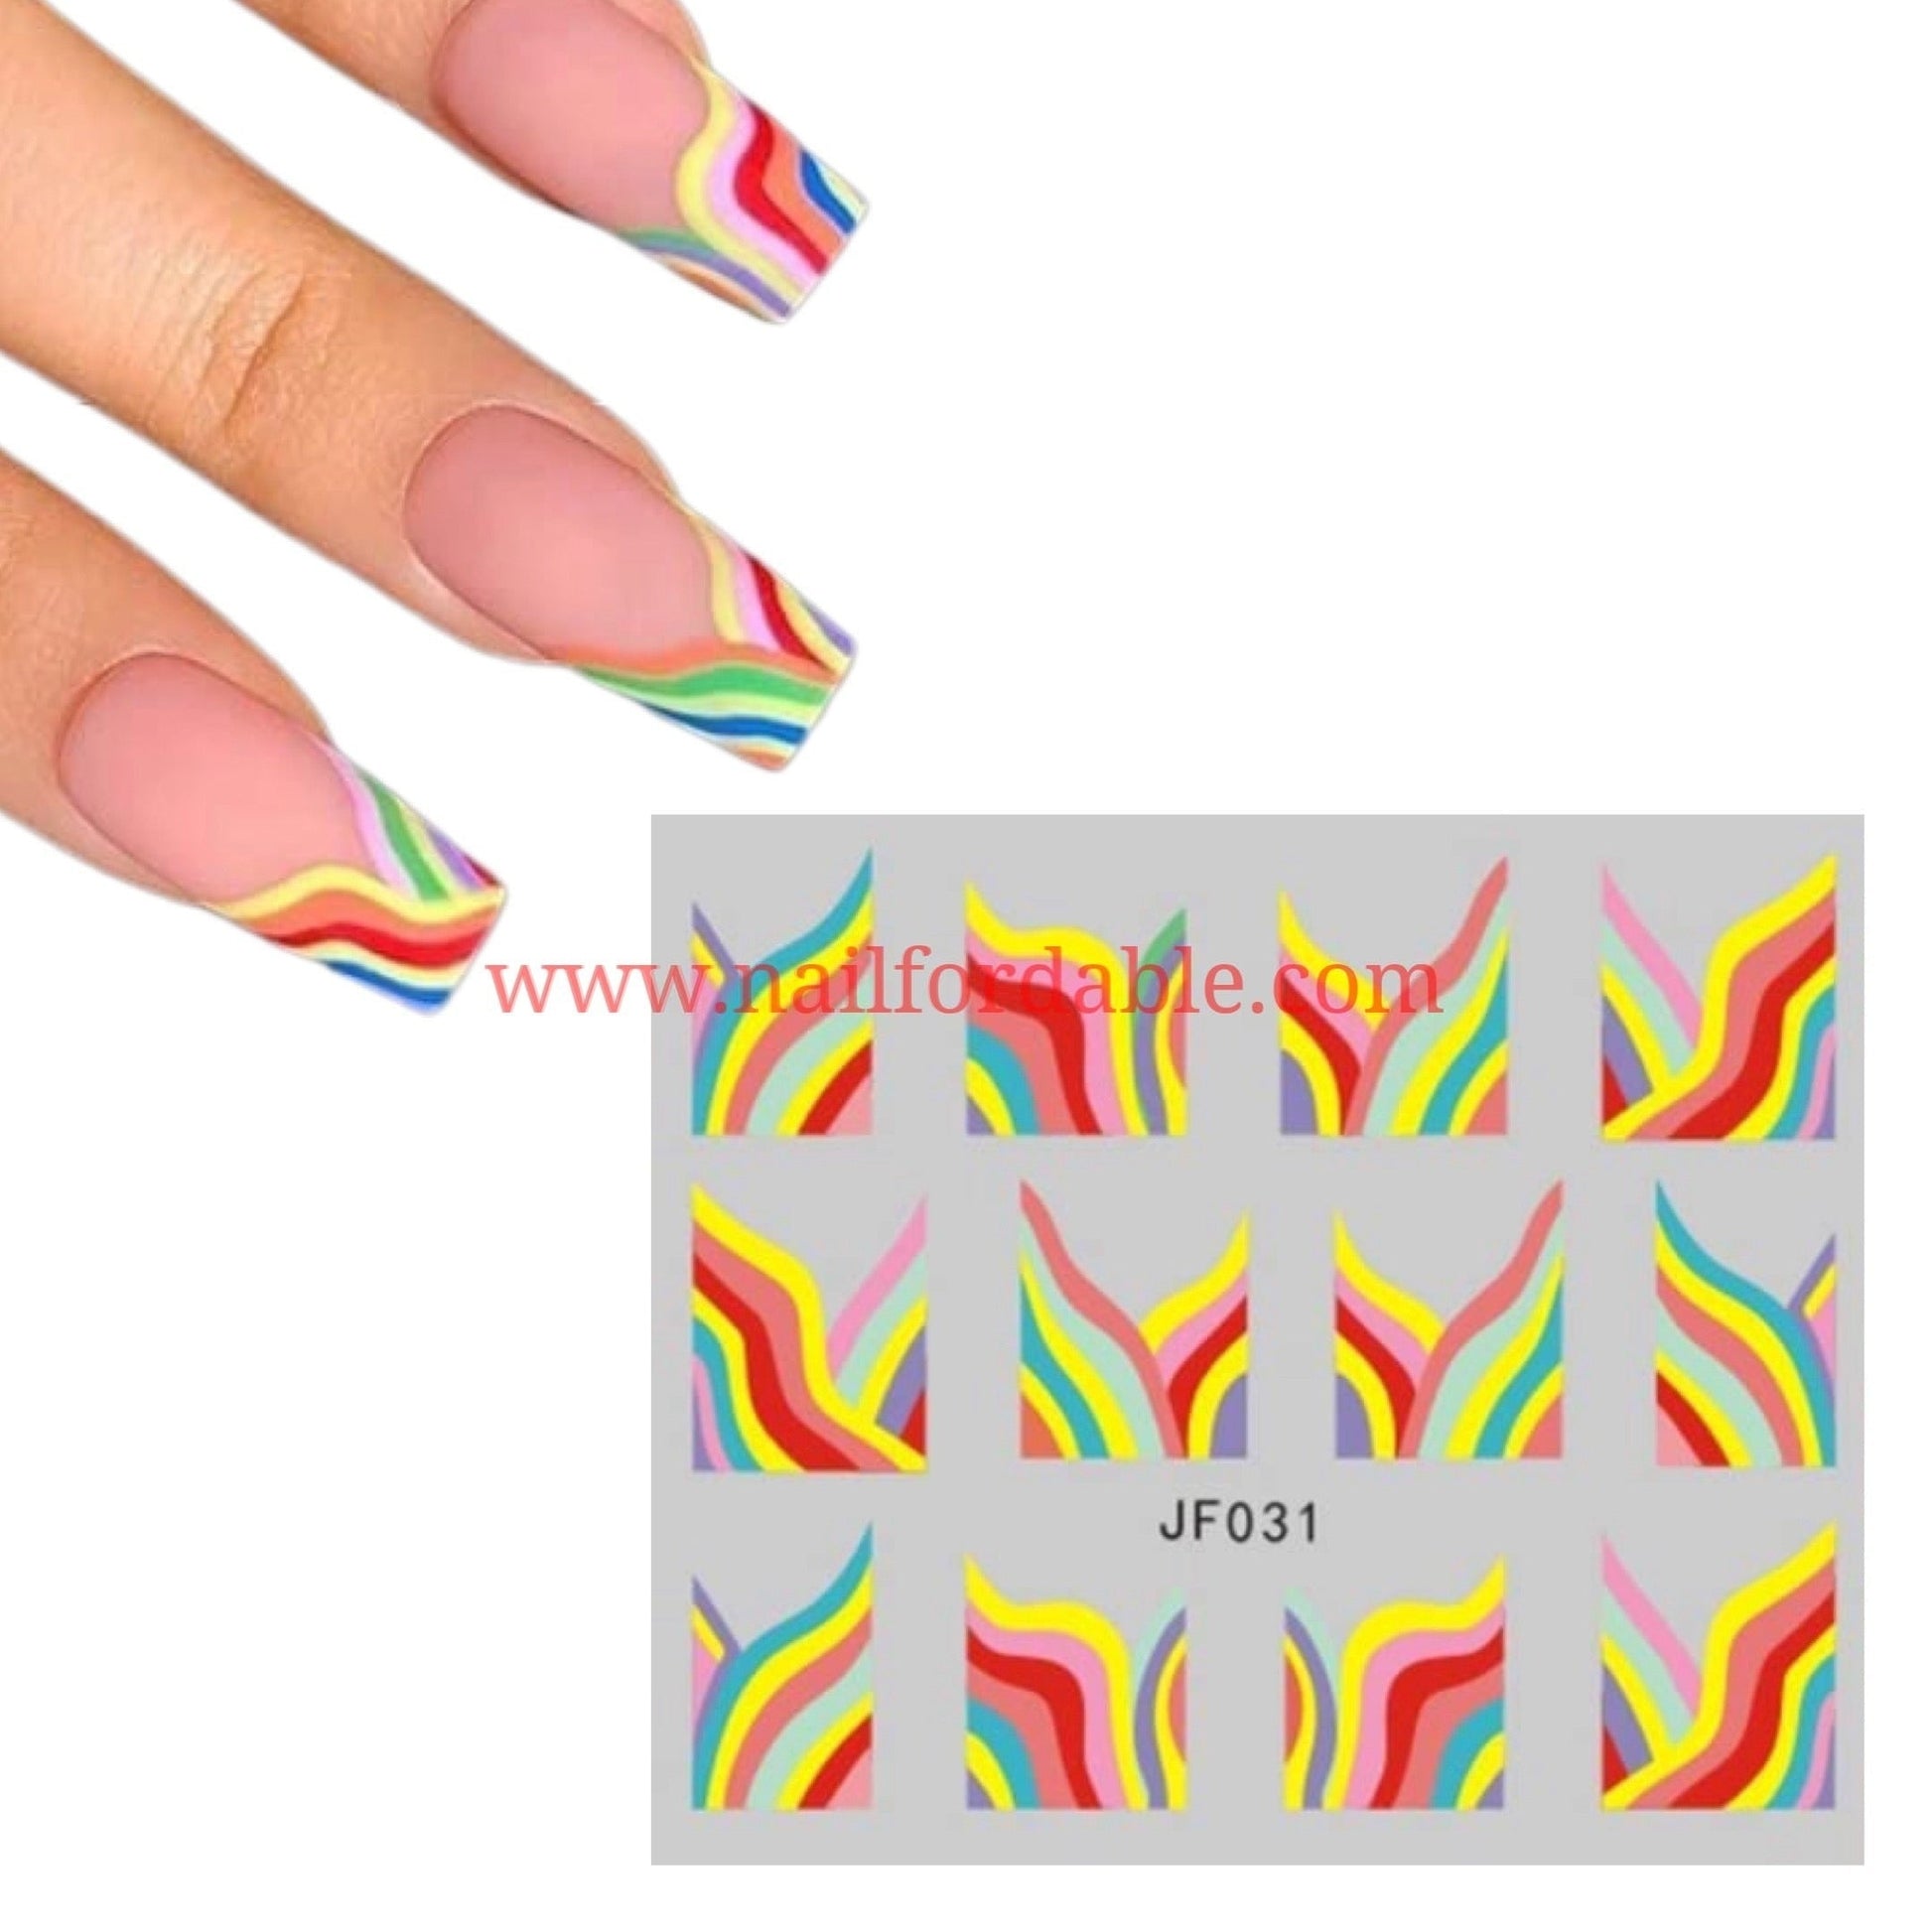 Flames water decal Nail Wraps | Semi Cured Gel Wraps | Gel Nail Wraps |Nail Polish | Nail Stickers